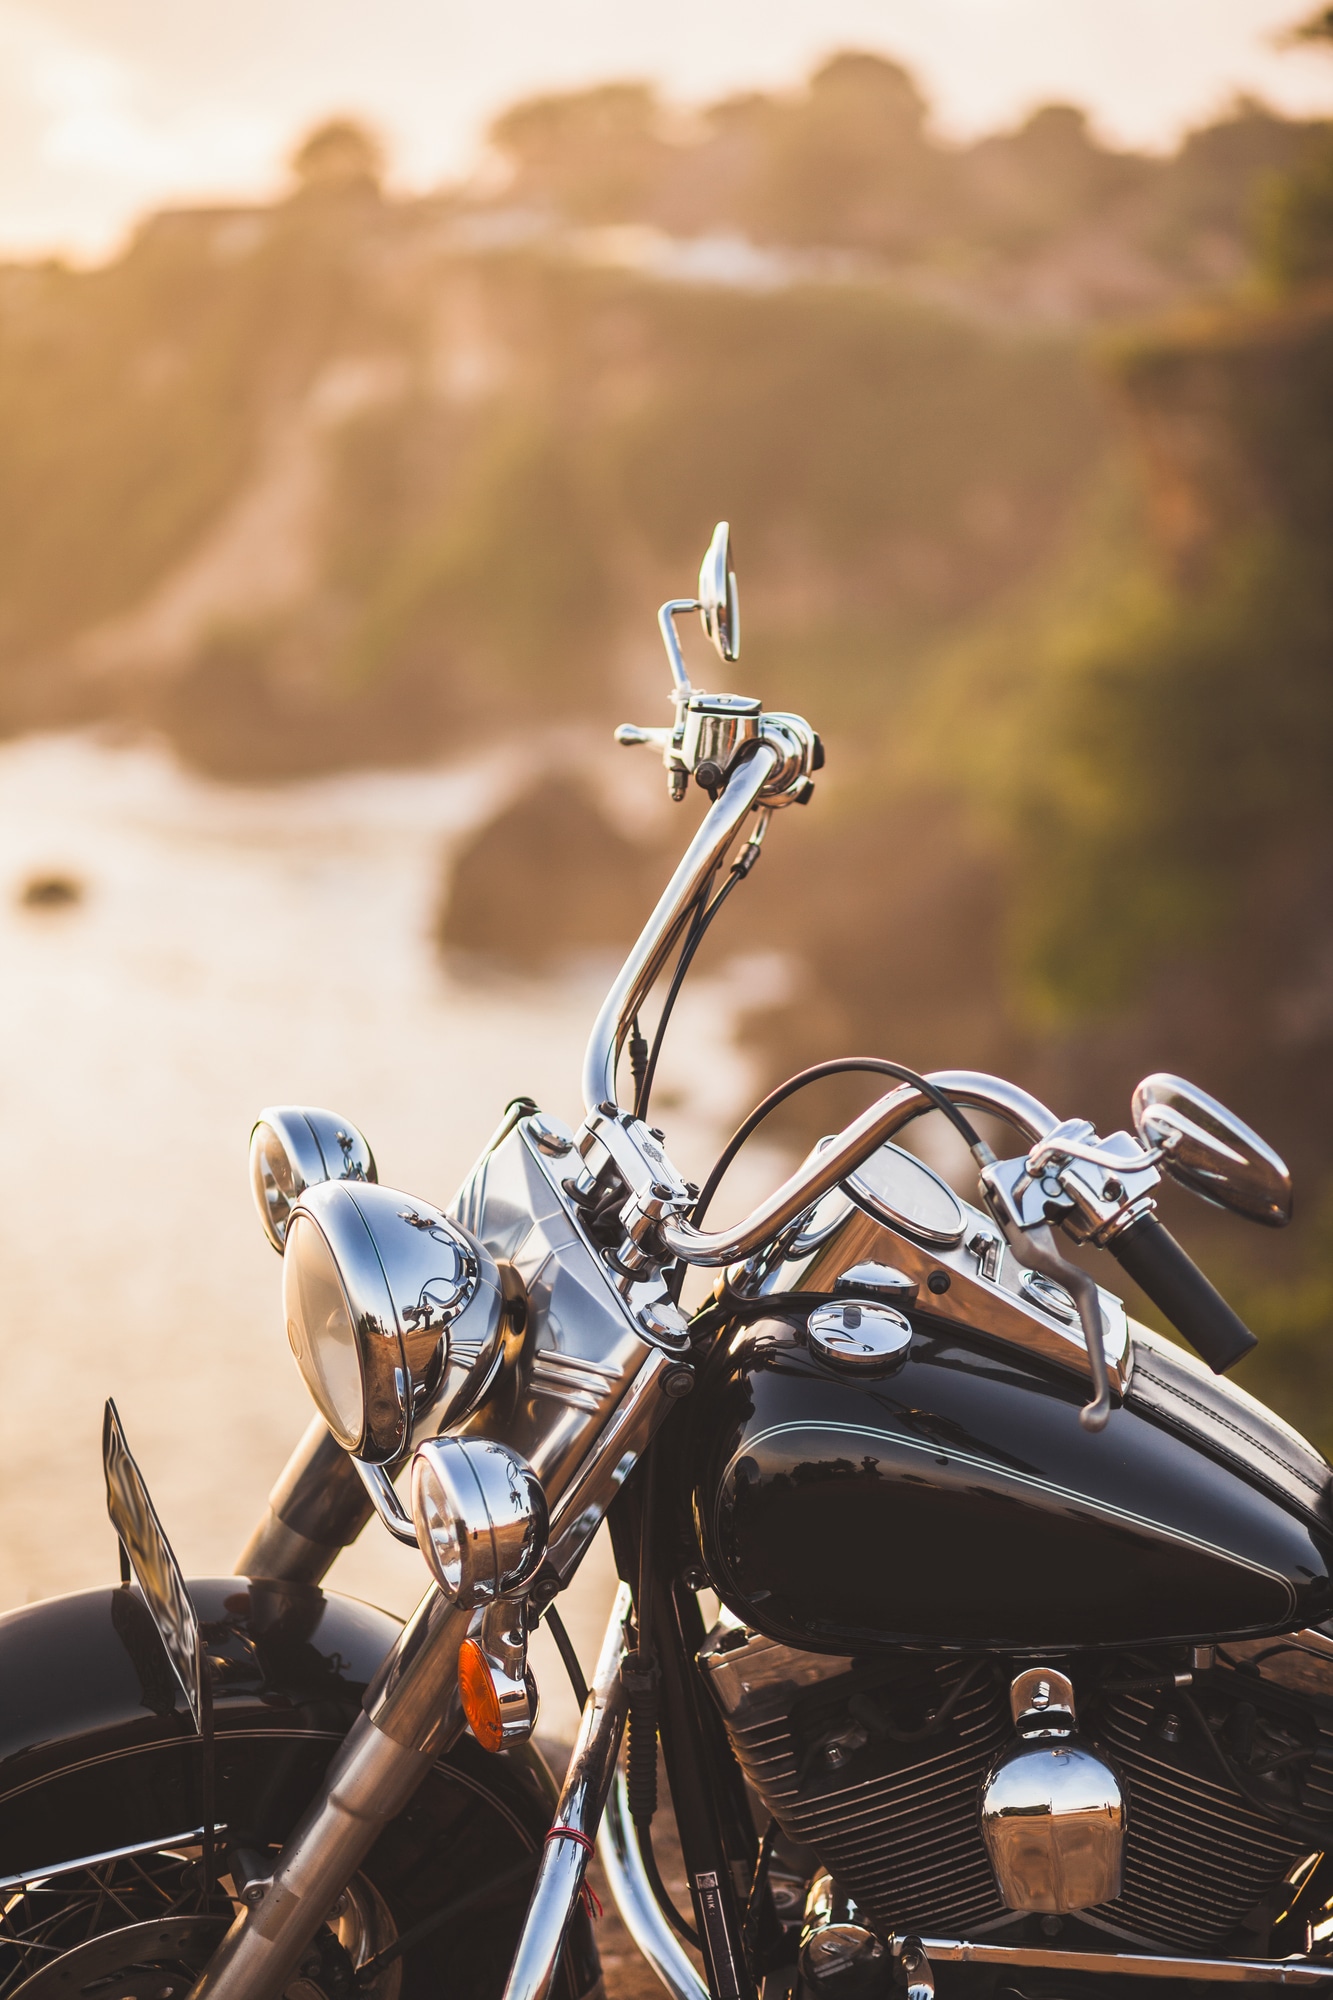 , About to Buy a New Motorbike? Make Sure to Get These 7 Accessories Too, Days of a Domestic Dad